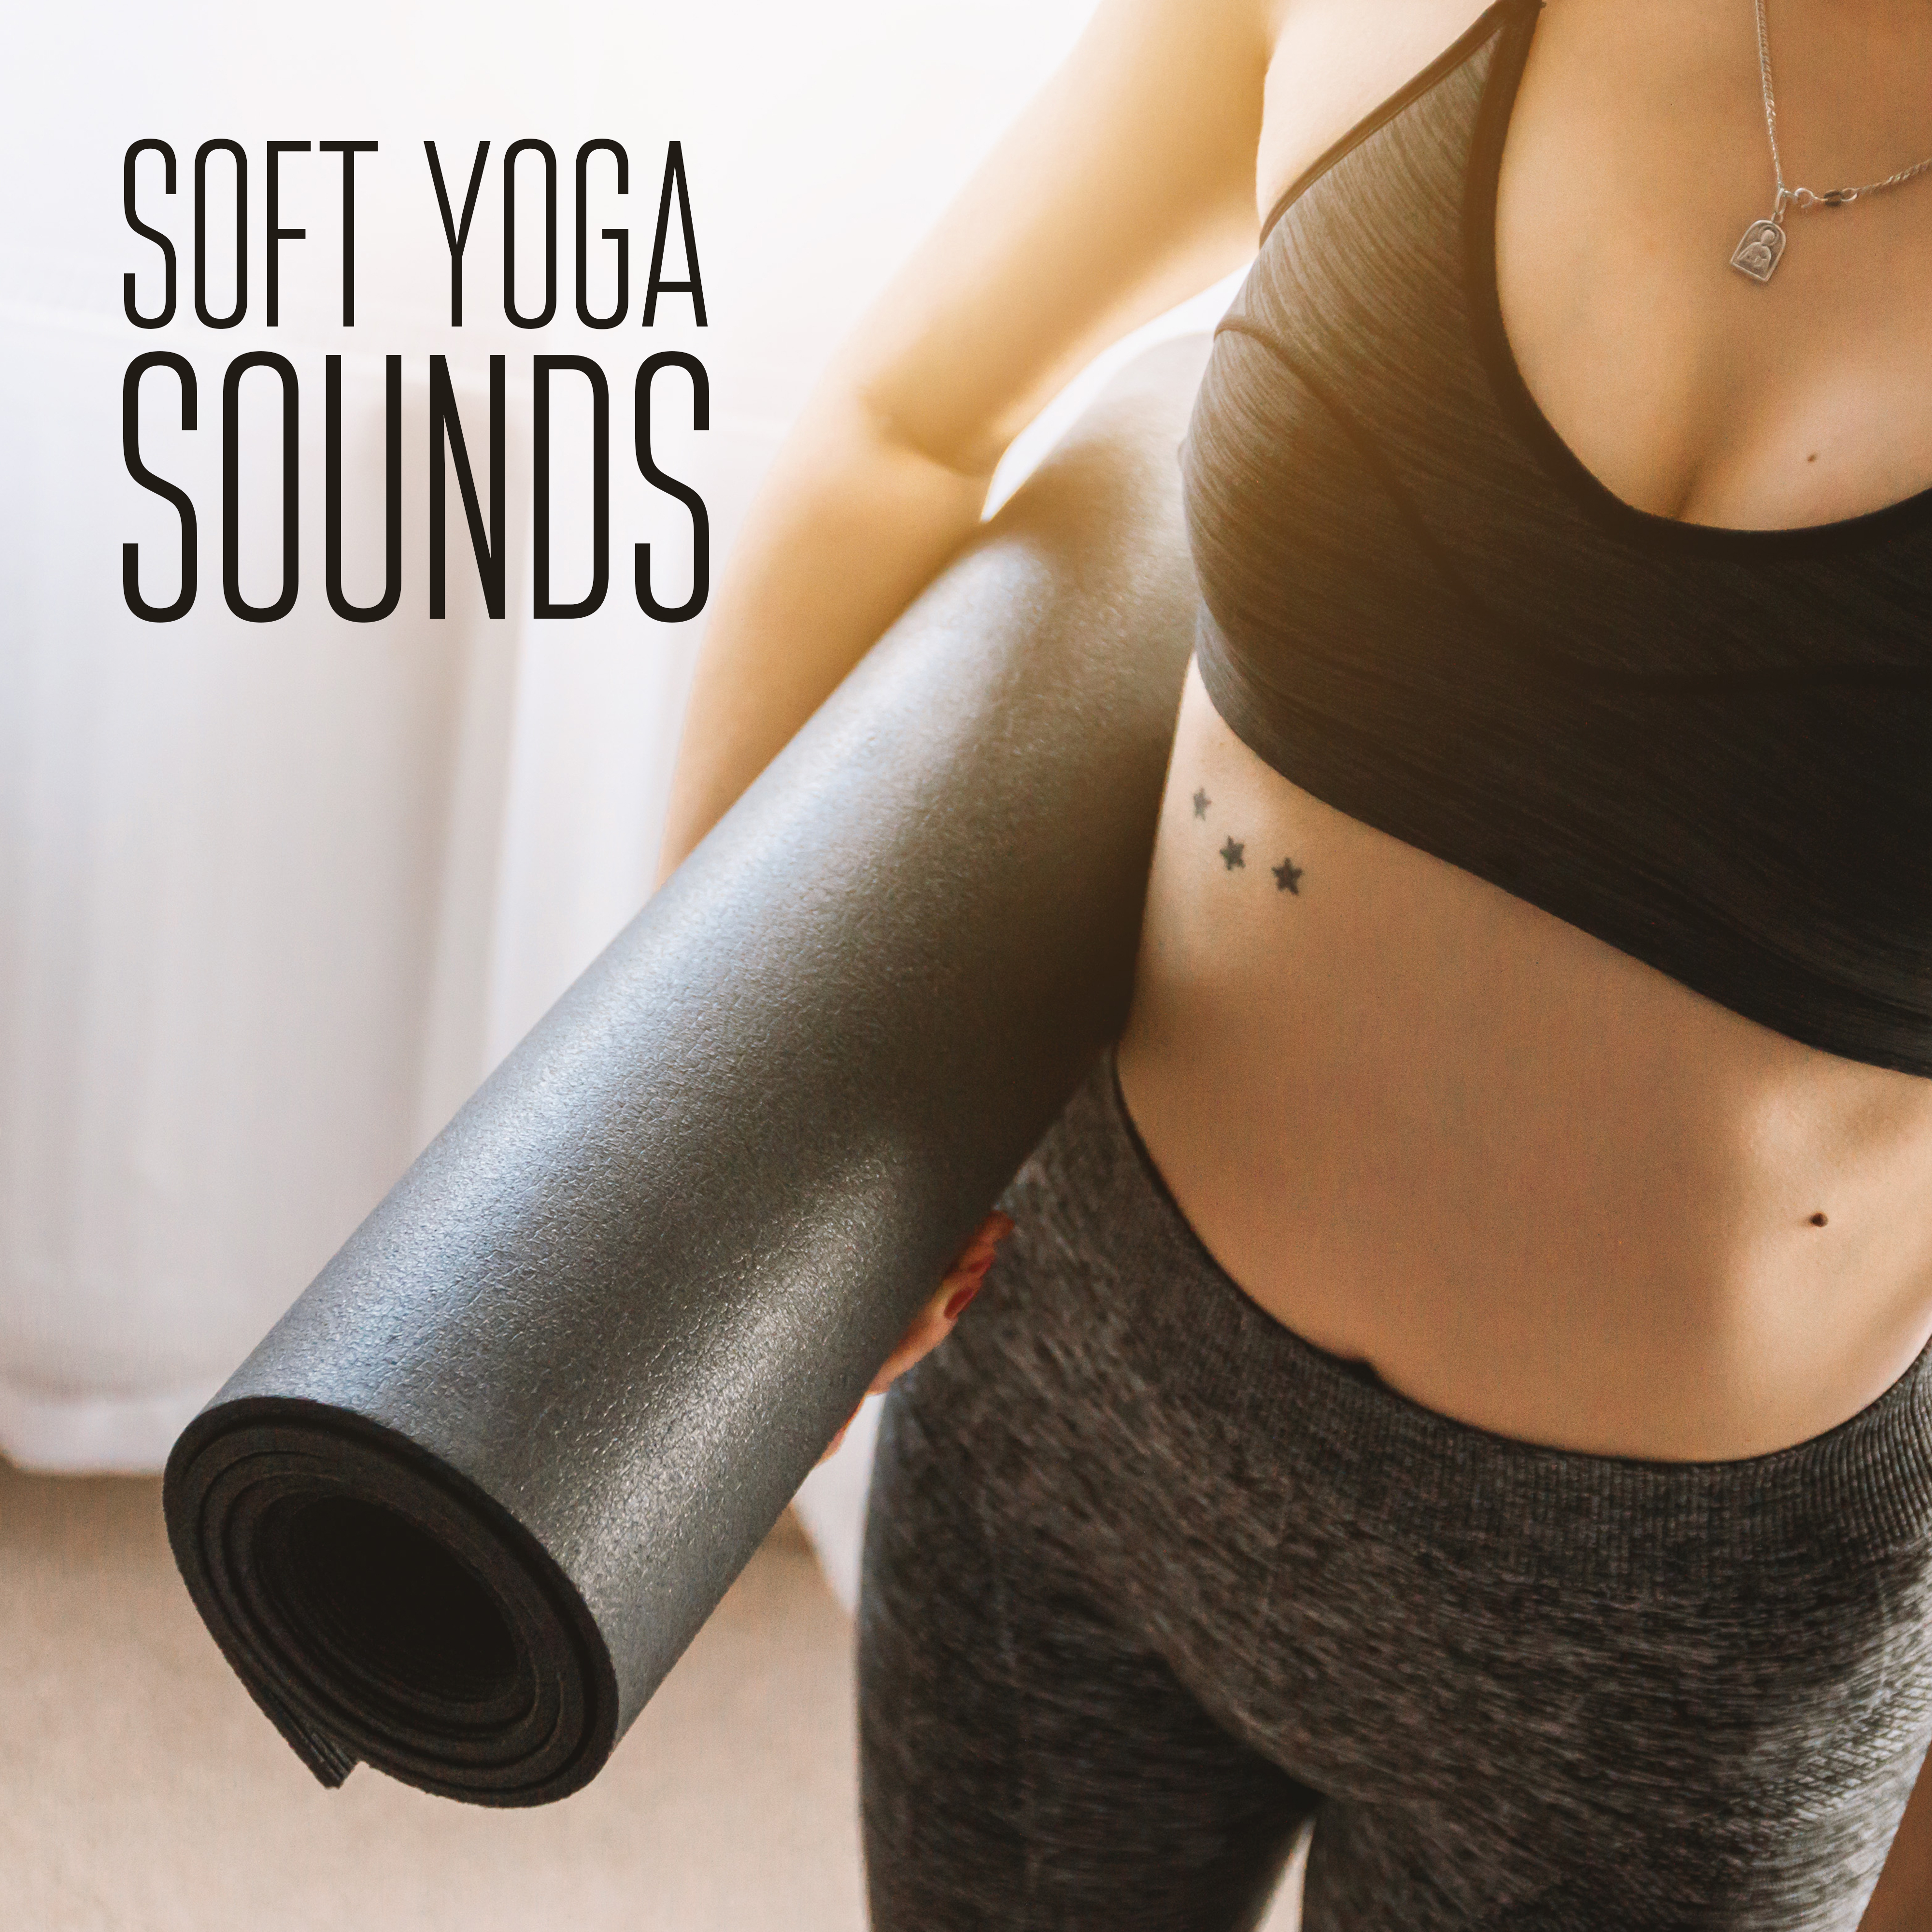 Sounds of Yoga